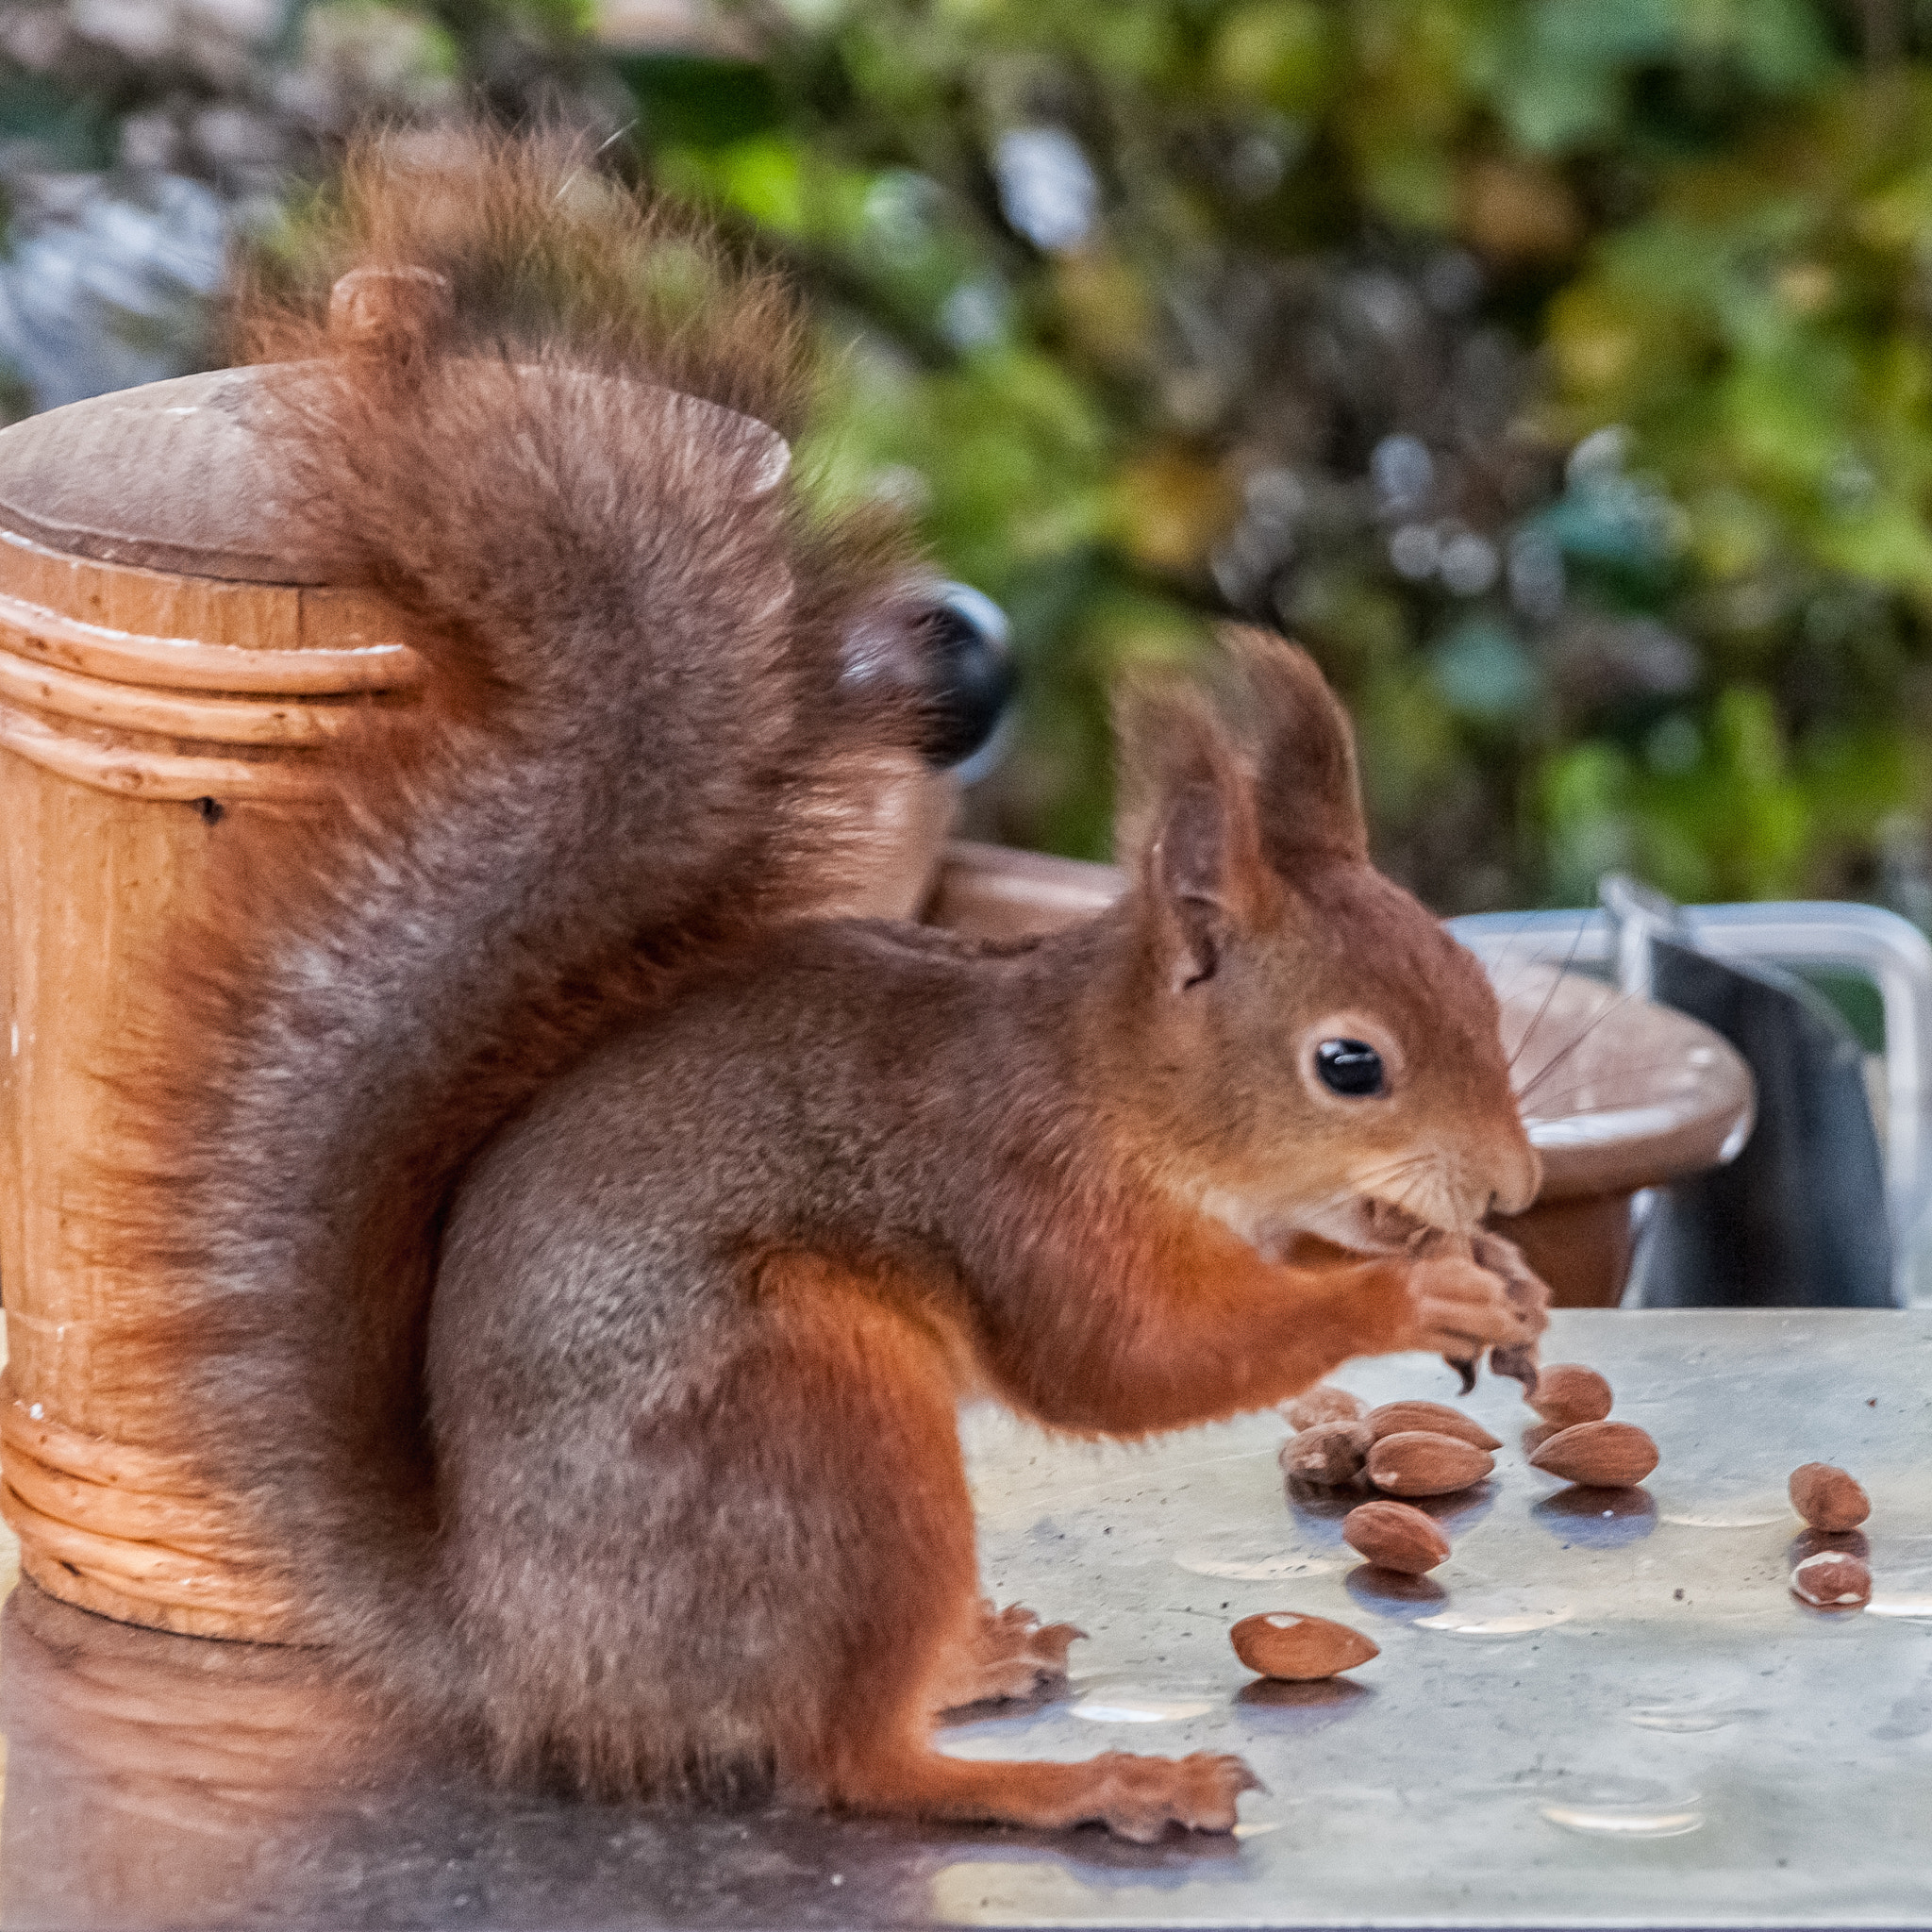 Nikon D300 + Sigma 18-200mm F3.5-6.3 DC sample photo. The squirrel on the table photography